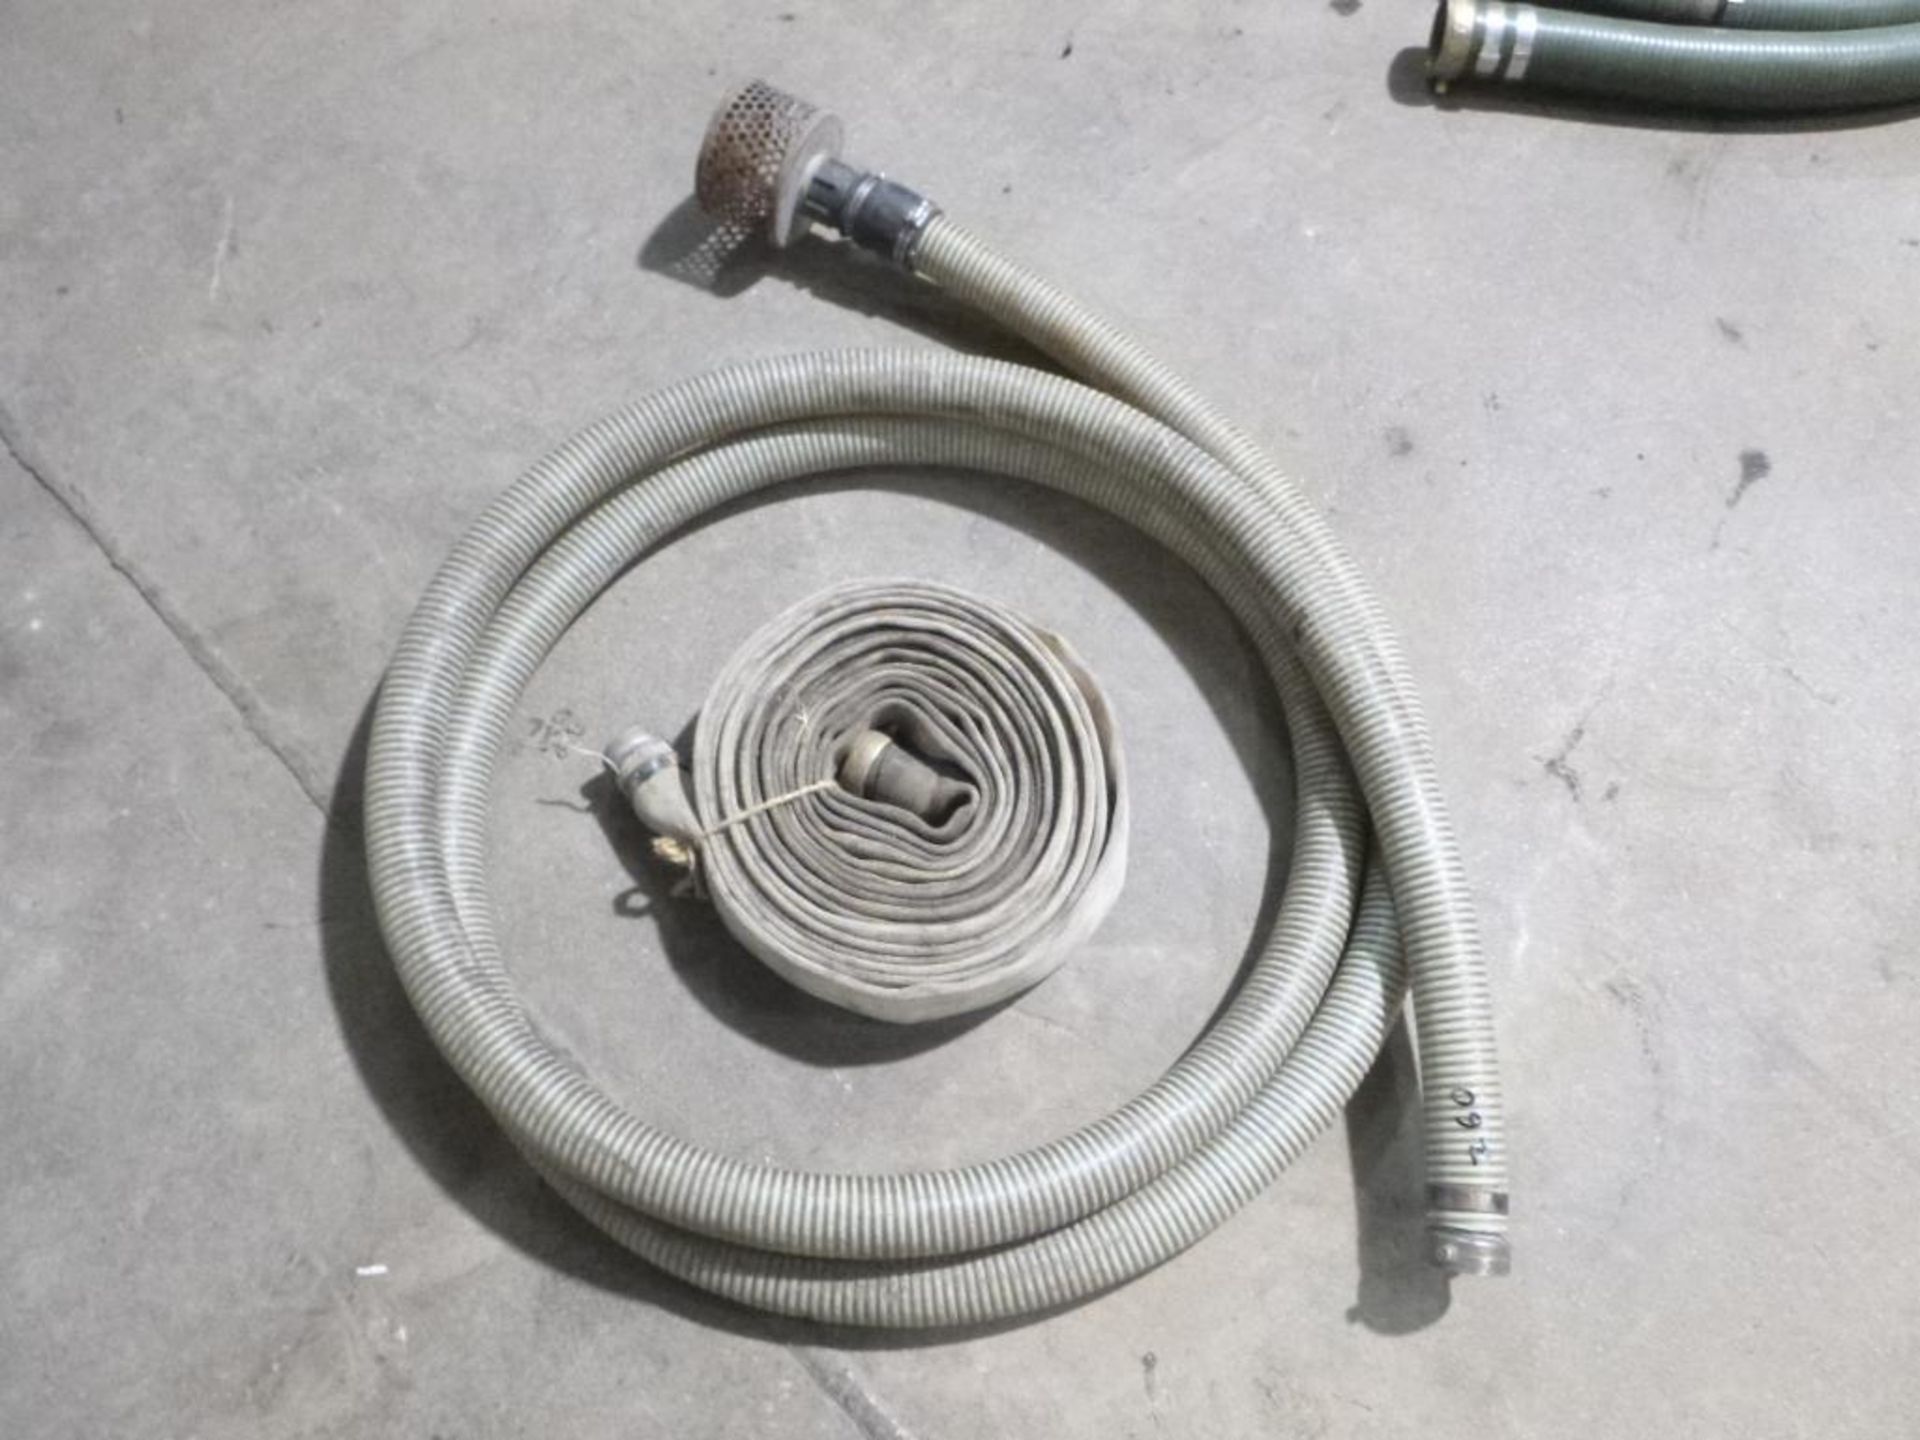 LOT: (1) 2 in. Intake Hose, (1) 2 in. Discharge Hose - Image 2 of 2